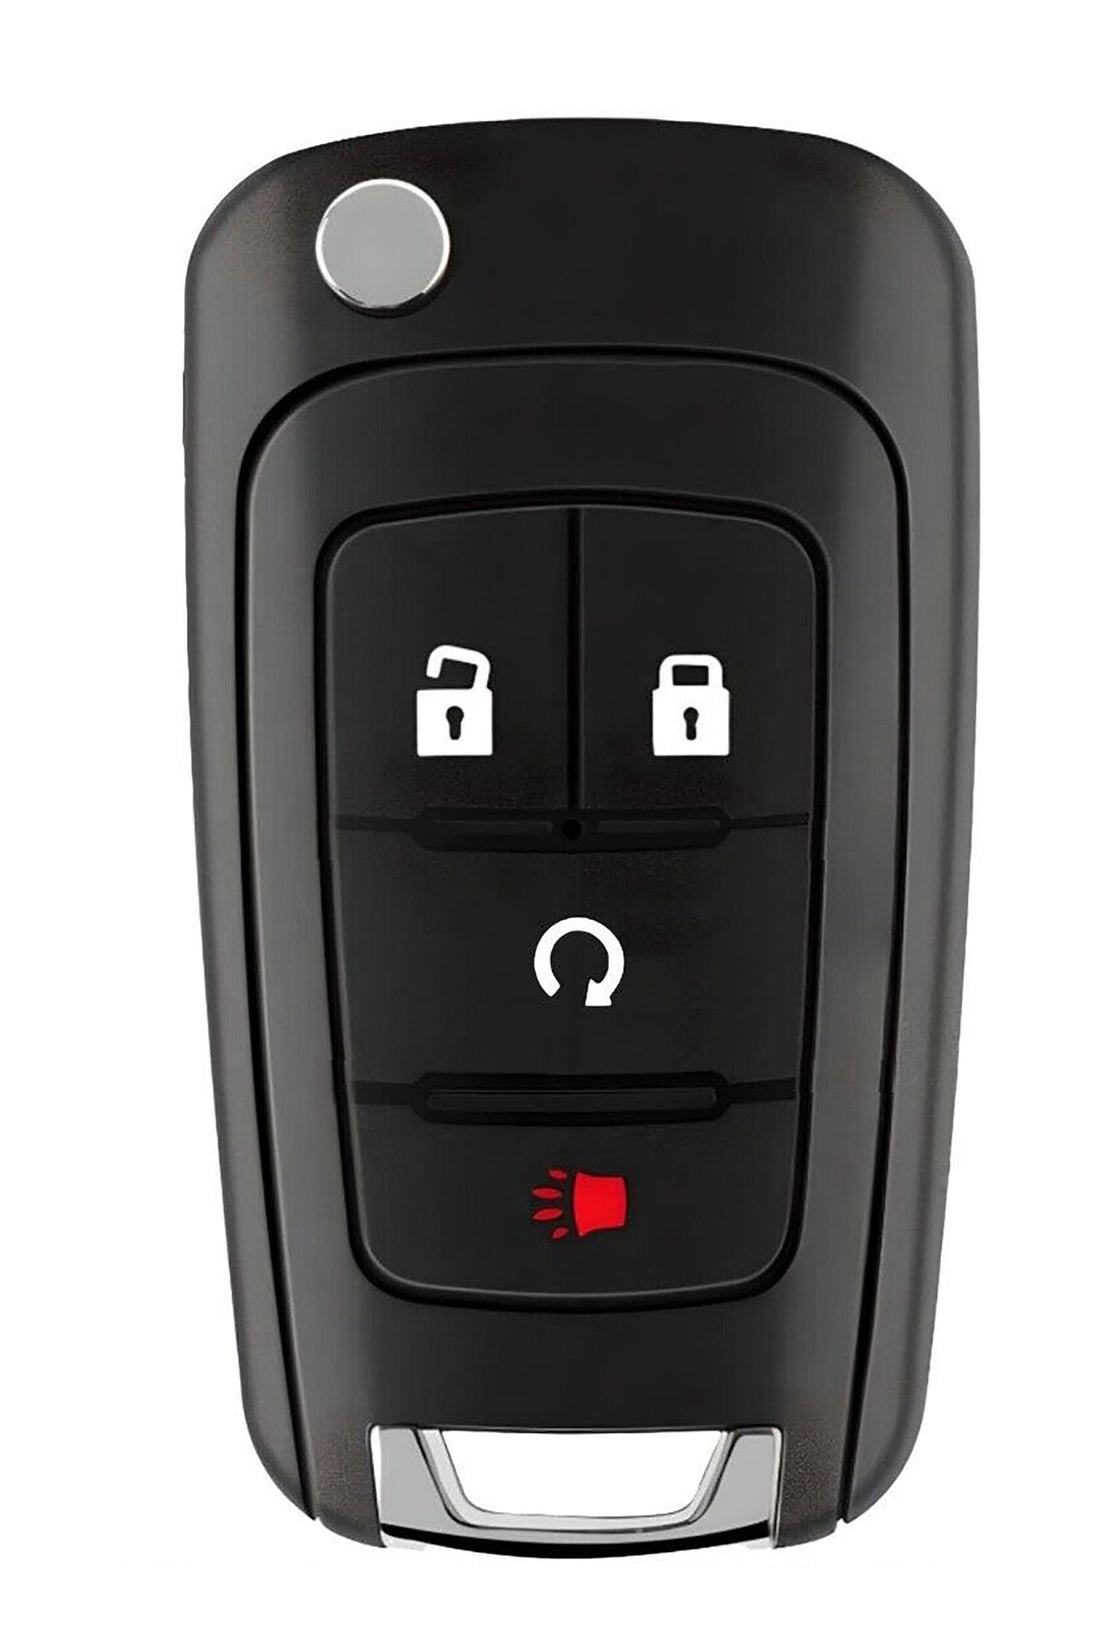 1x New Quality Replacement Key Fob Remote Compatible with & Fit For Chevrolet & Buick Vehicles - MPN KR55WK50073-10